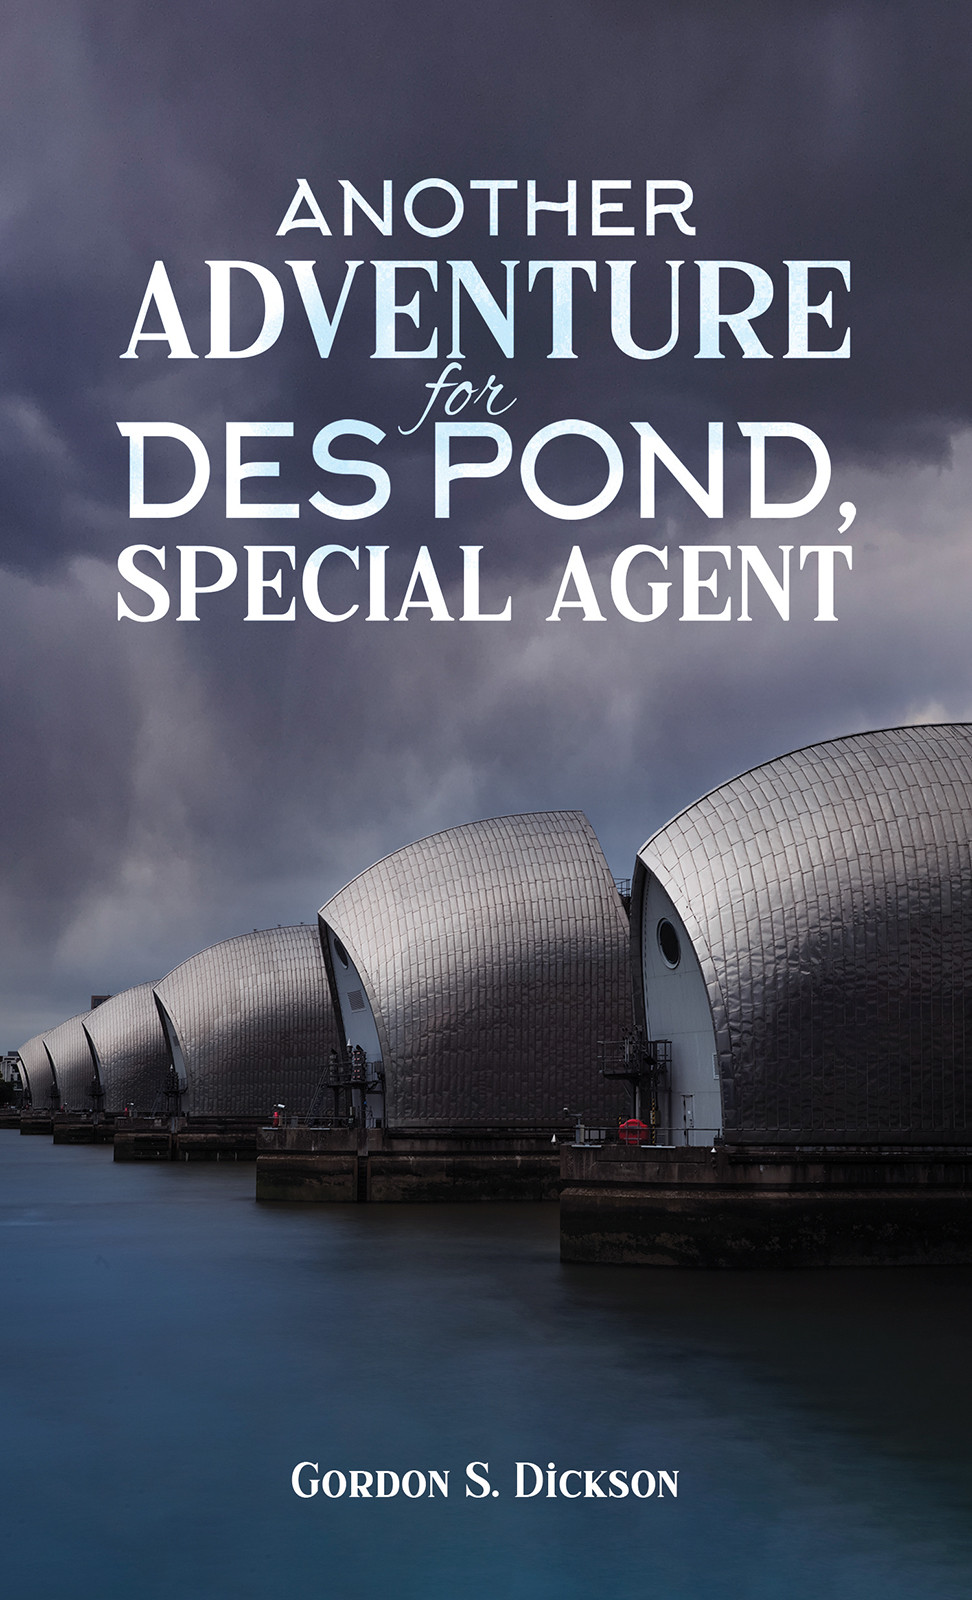 Another Adventure for Des Pond, Special Agent-bookcover